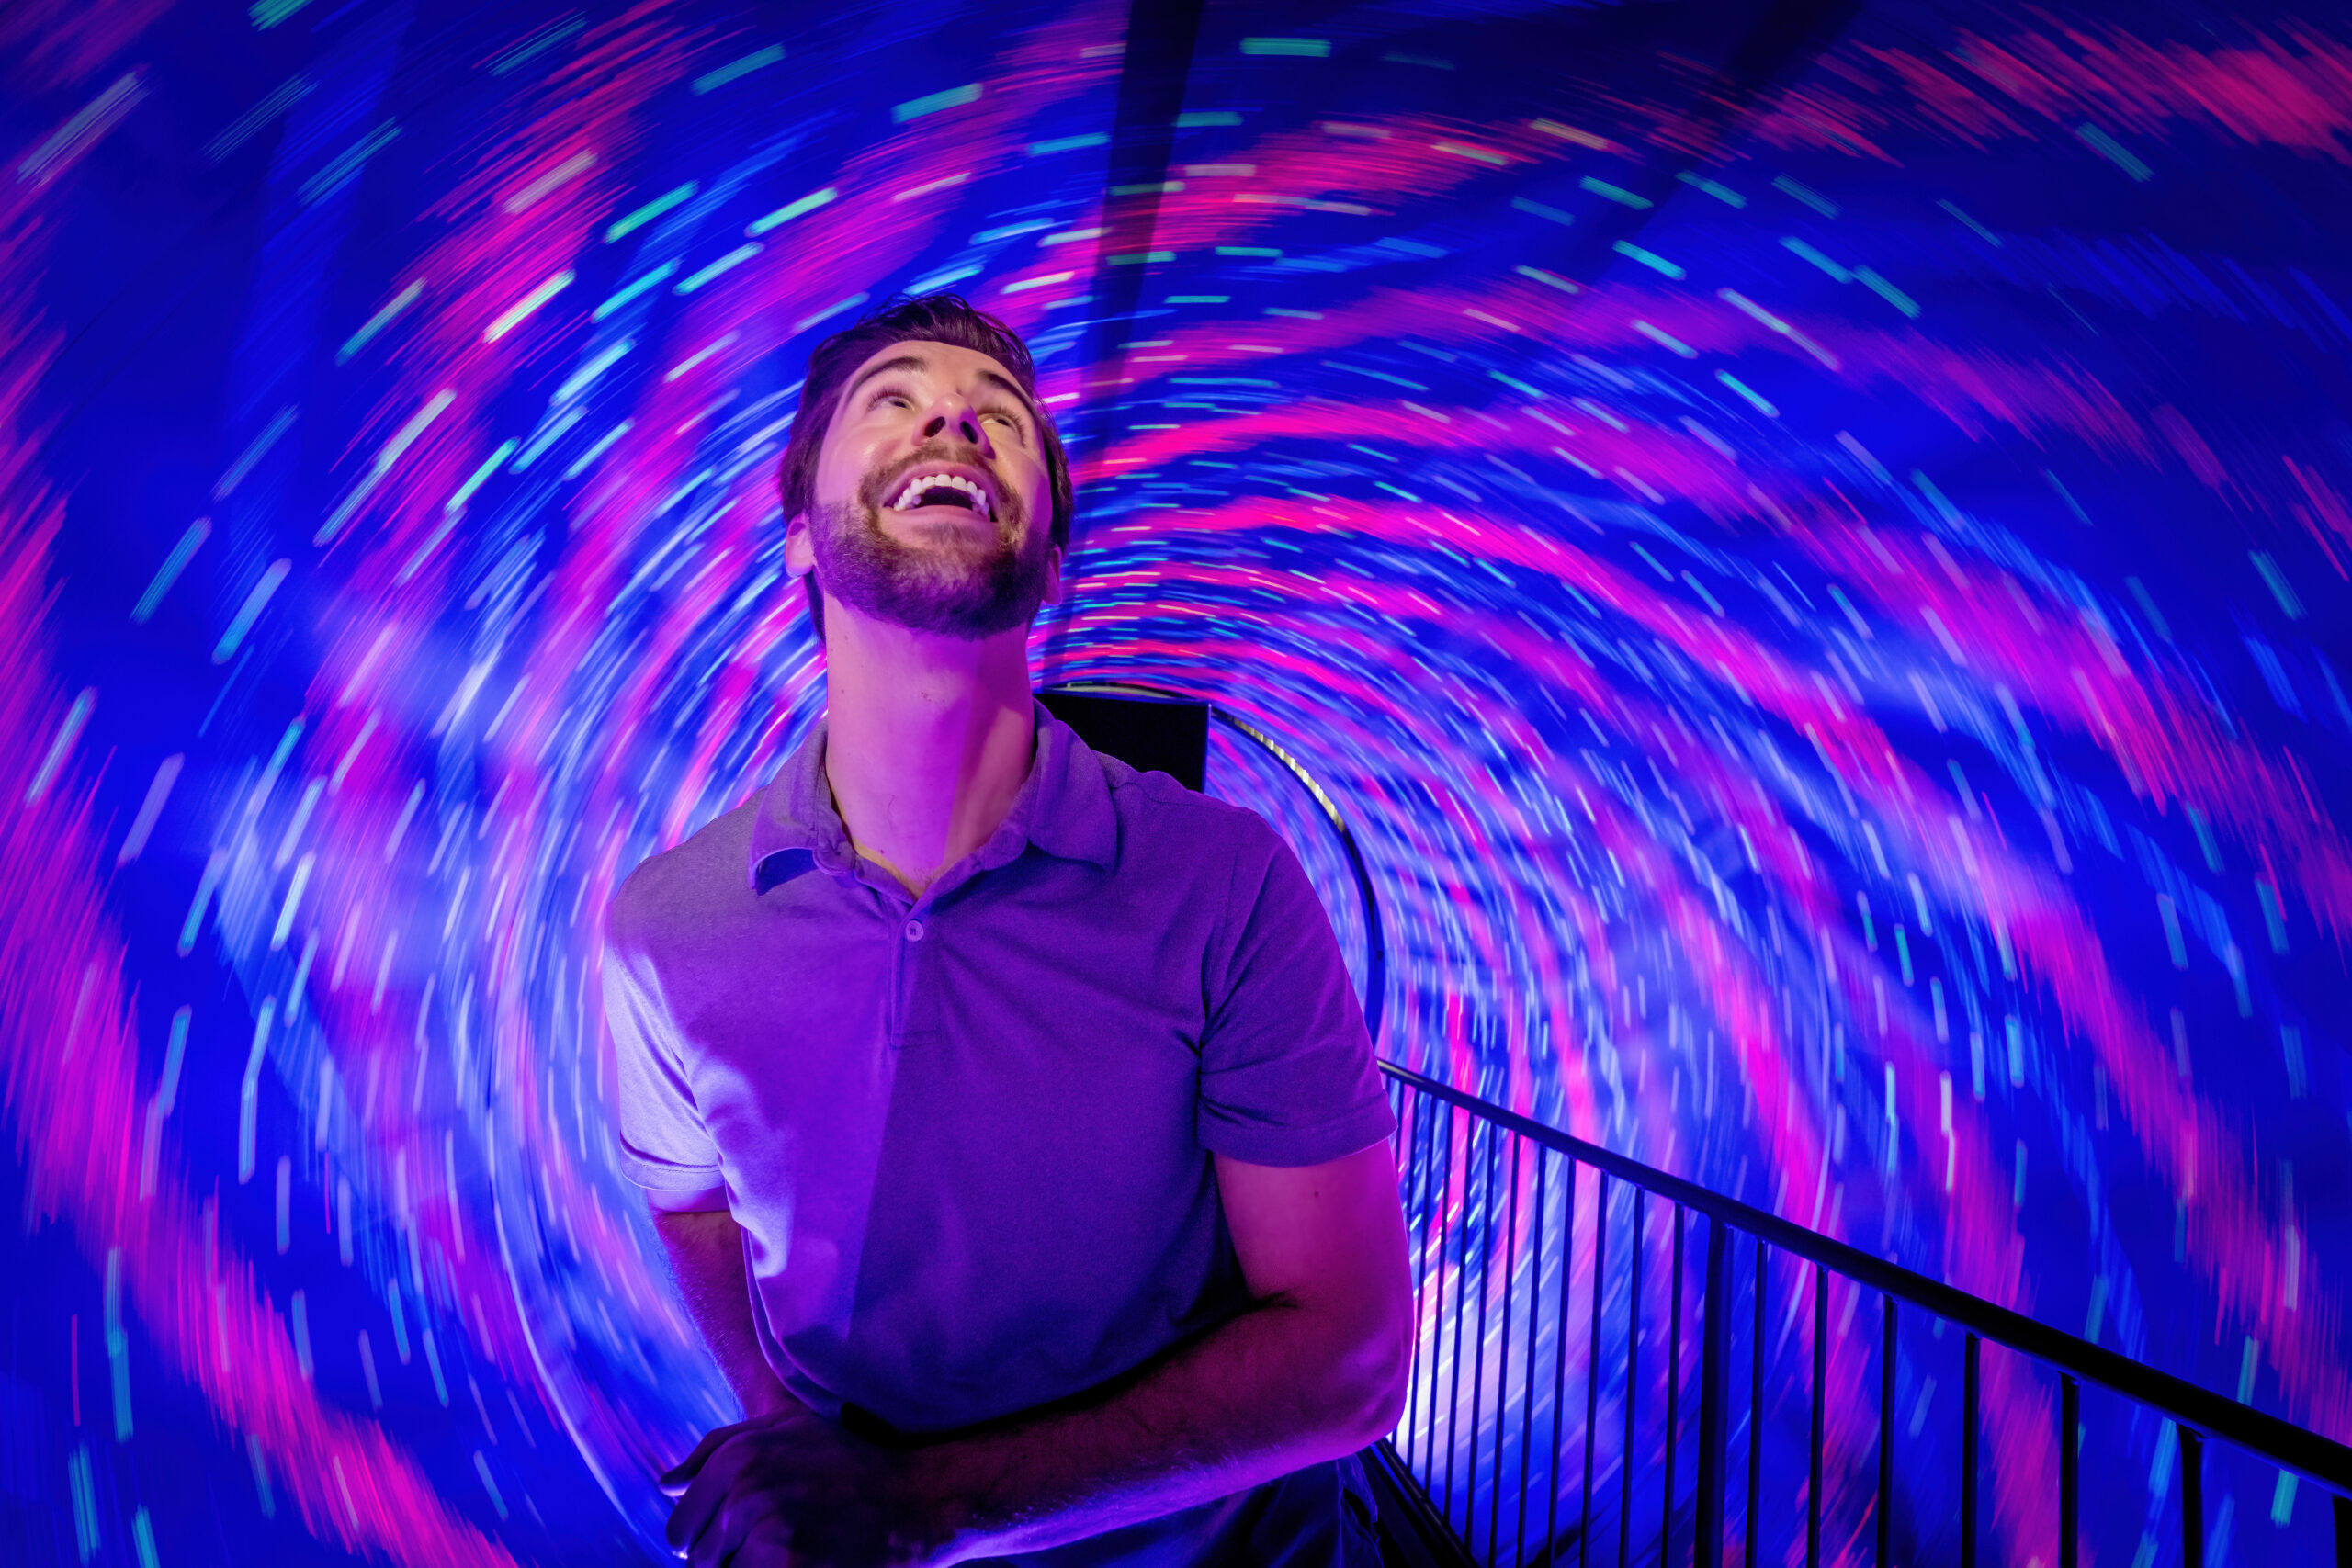 The Museum of Illusions has submitted plans to open in Manchester